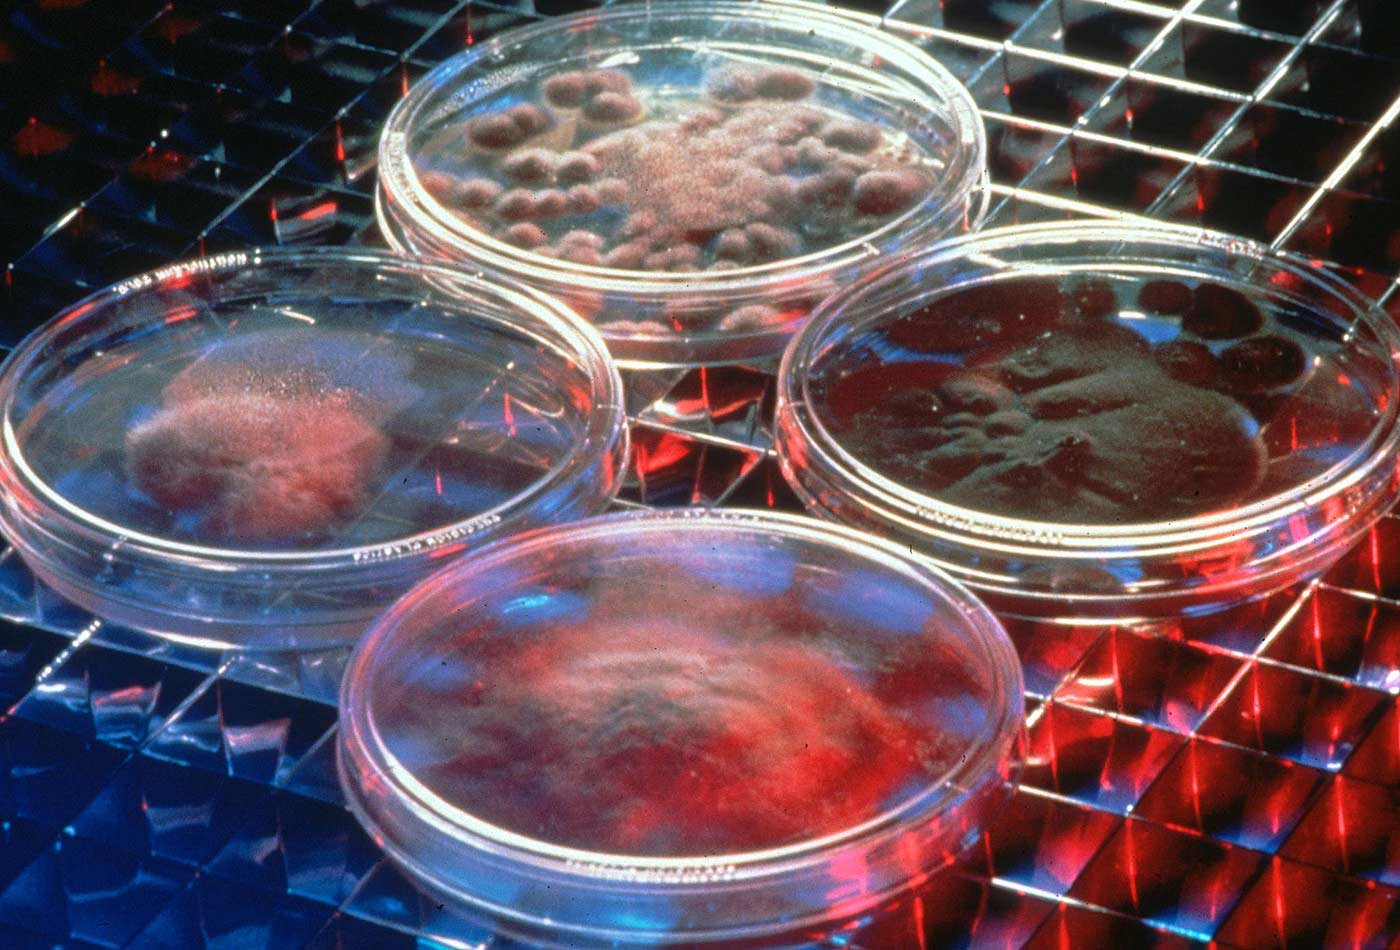 Pacific Northwest National Laboratory, petri dishes still retain a prominent place in laboratories today.